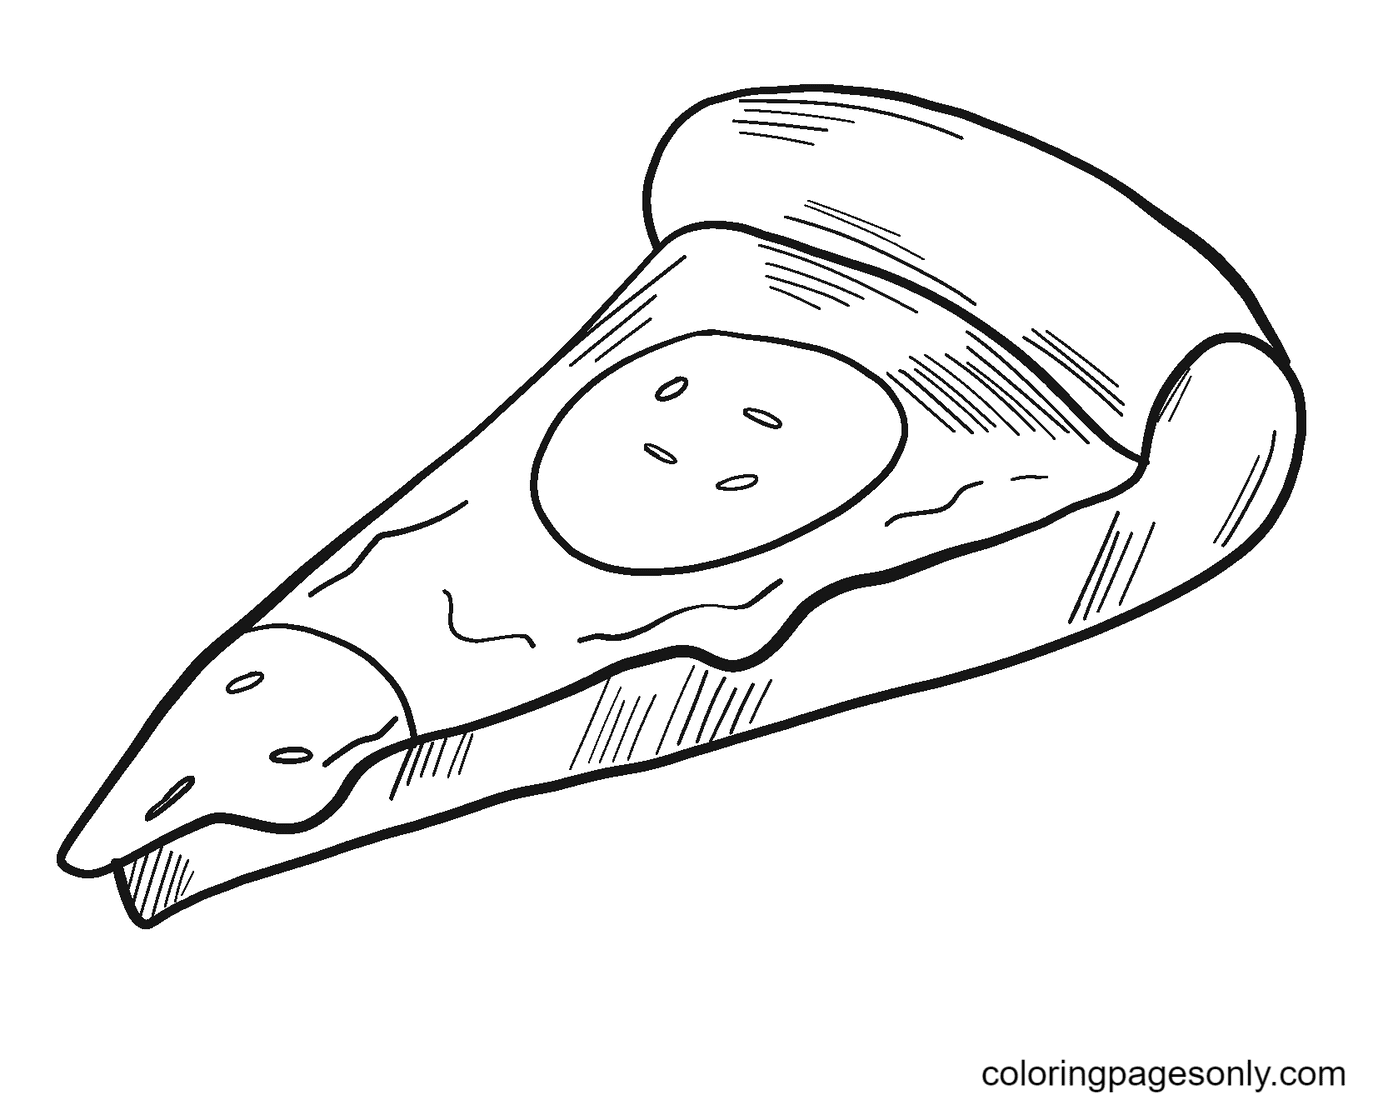 Slice of Pizza Printable Coloring Page